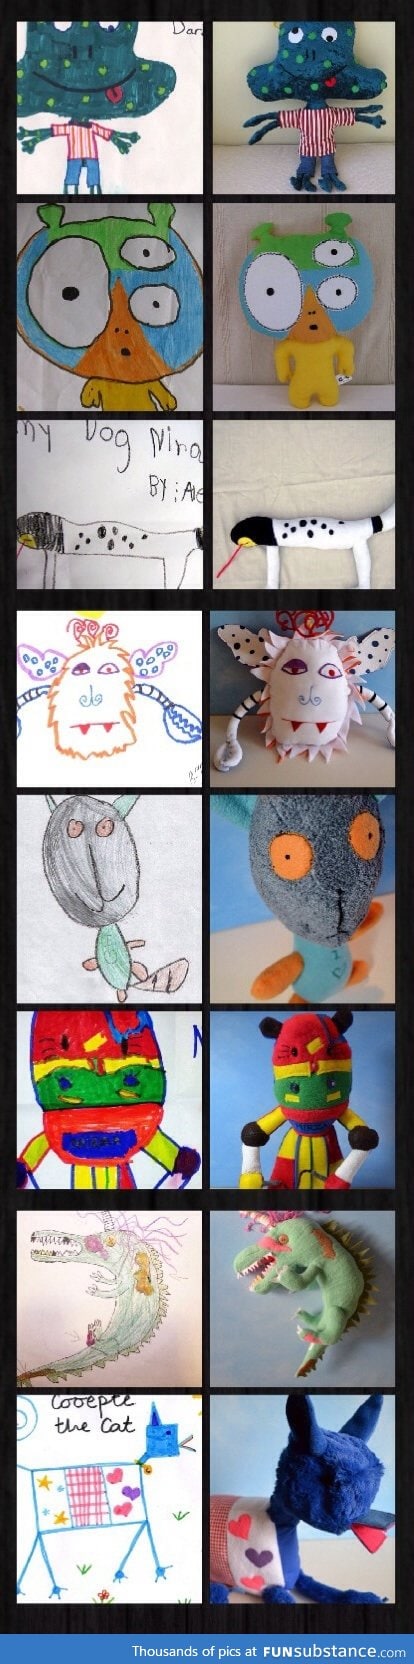 Kids' drawings turned into plushies